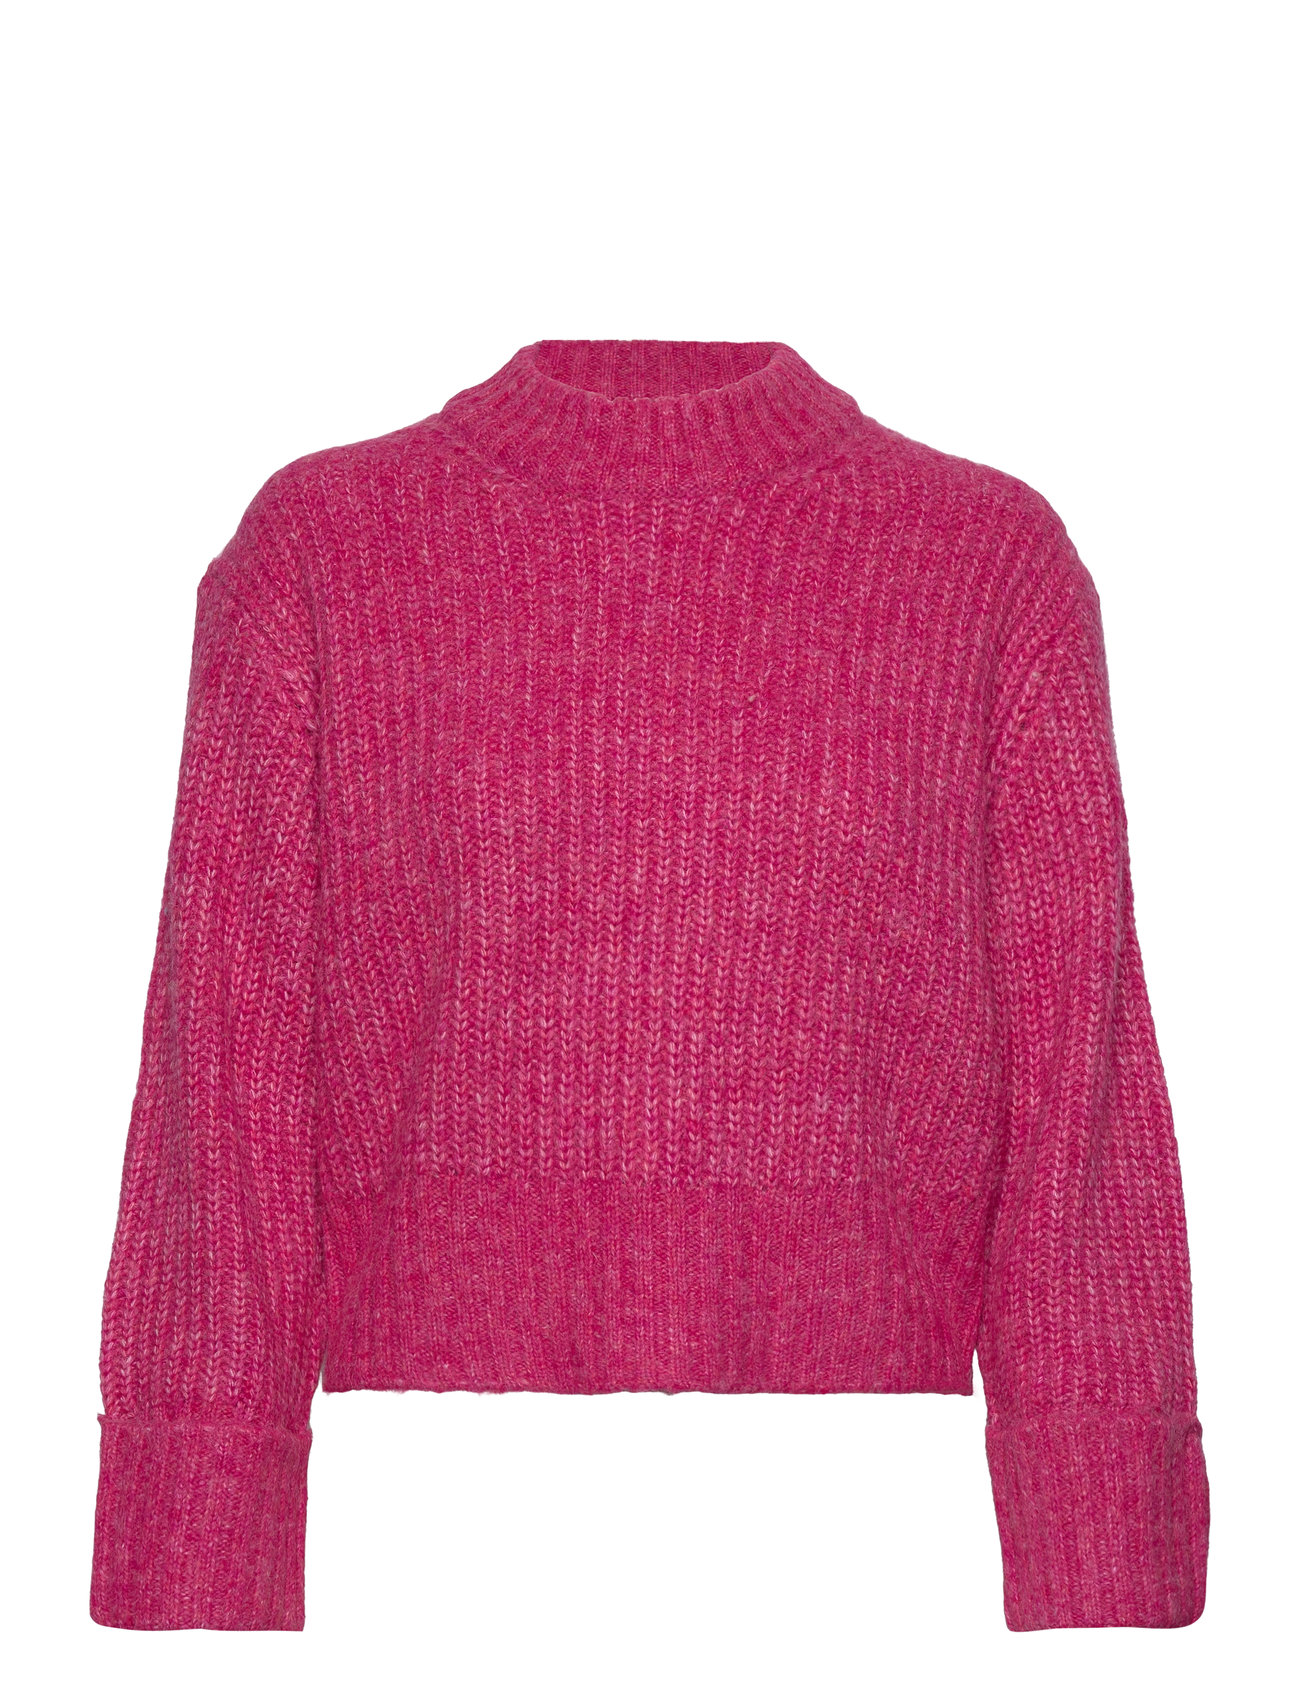 Knitted Sweater Tops Knitwear Jumpers Pink Gina Tricot